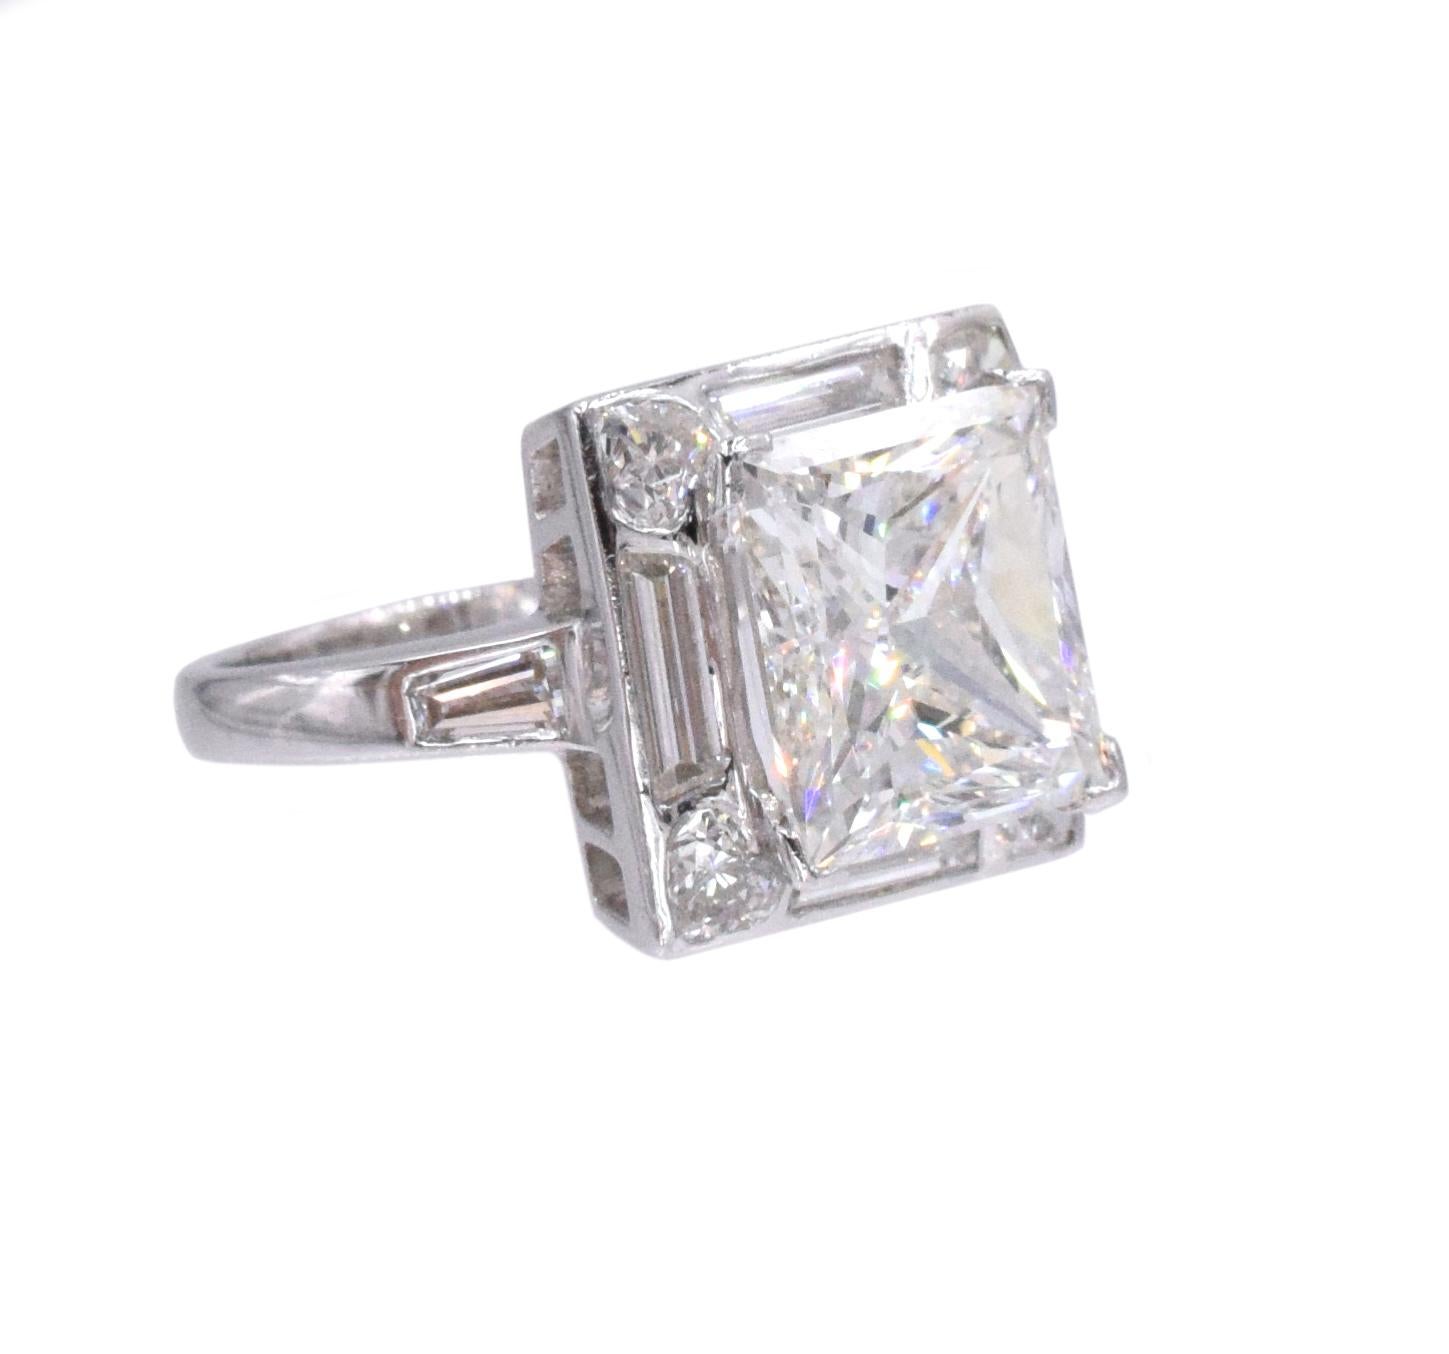 Diamond engagement ring in platinum.
Center of the ring set with 4.01ct princess cut diamond, color G, clarity VS1, GIA#8440332. Placed in a platinum mounting set with four trapezoid cut diamonds weighing total of 0.73ct, four heart shaped diamonds